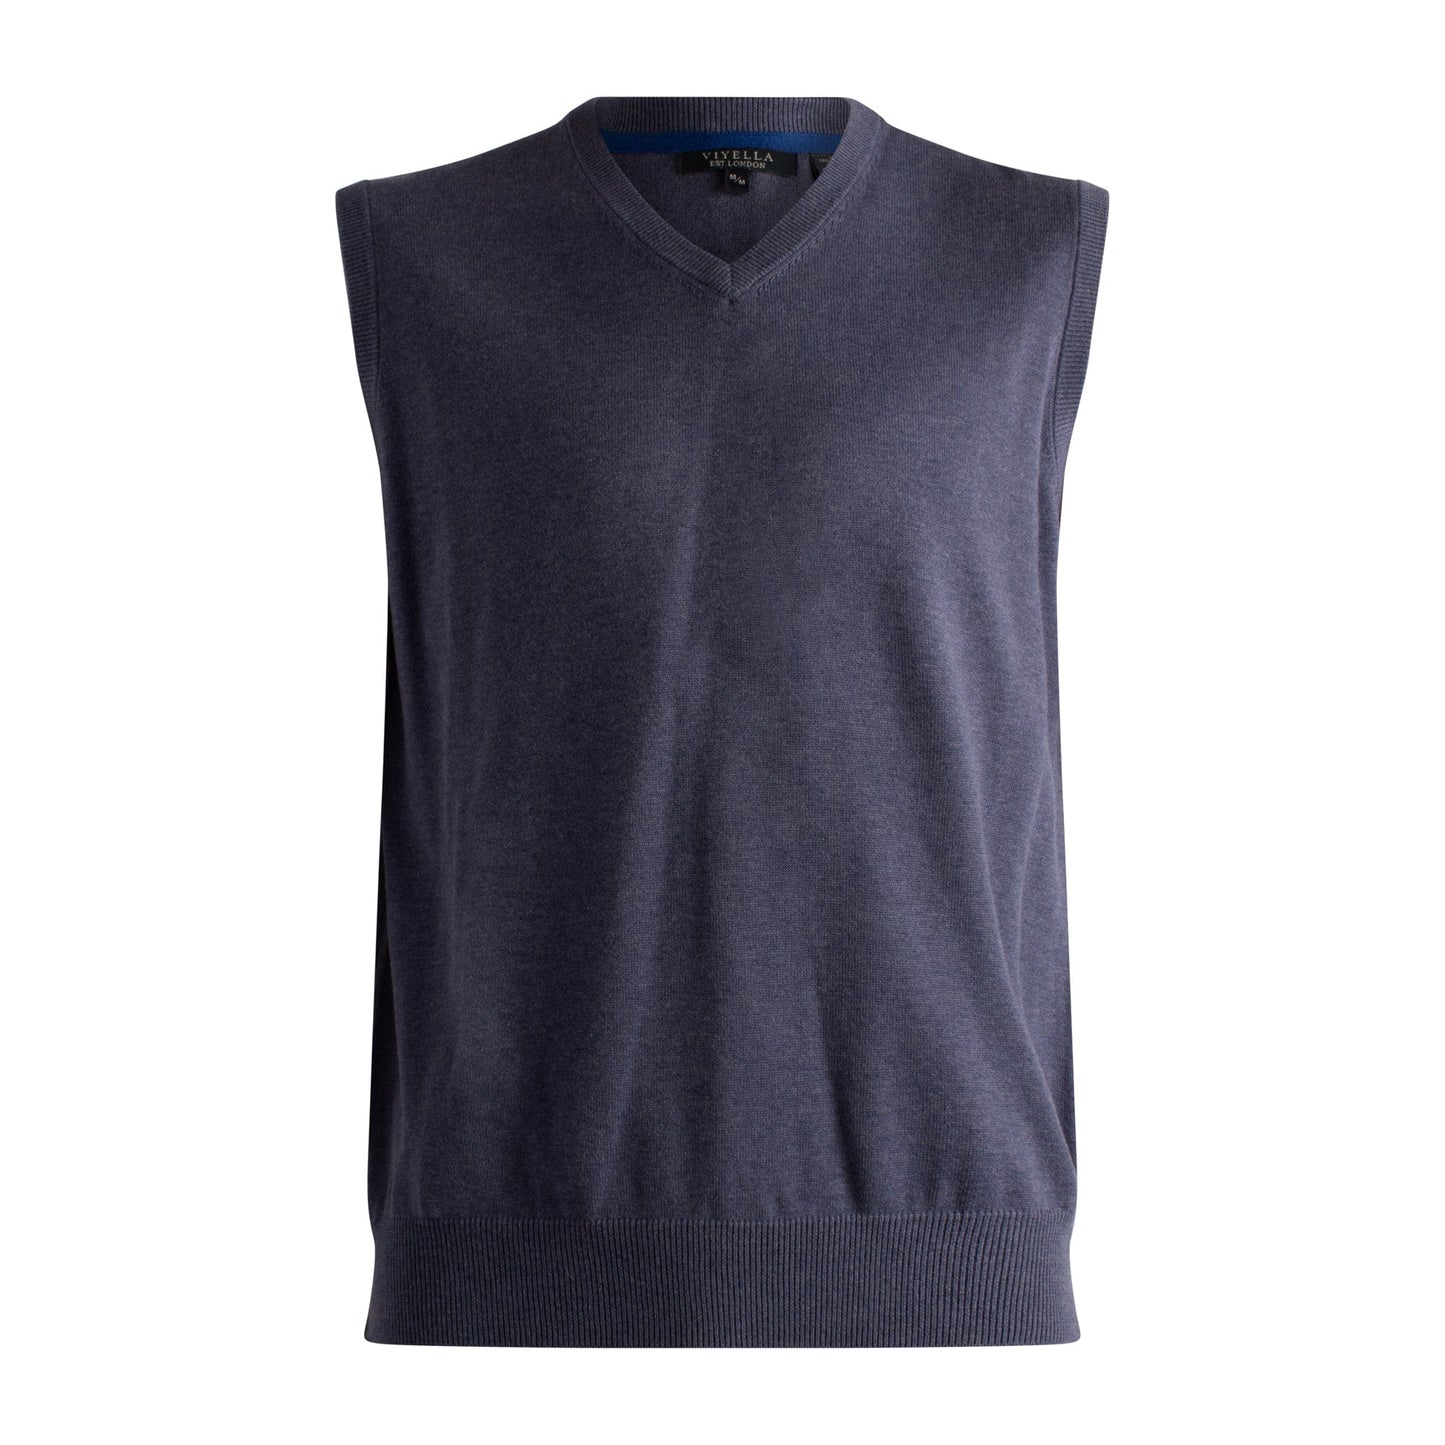 Viyella Stay Fashionable with our Cotton Blend V-Neck Pull Over Sweater Vest - Available in 8 Stunning Colors